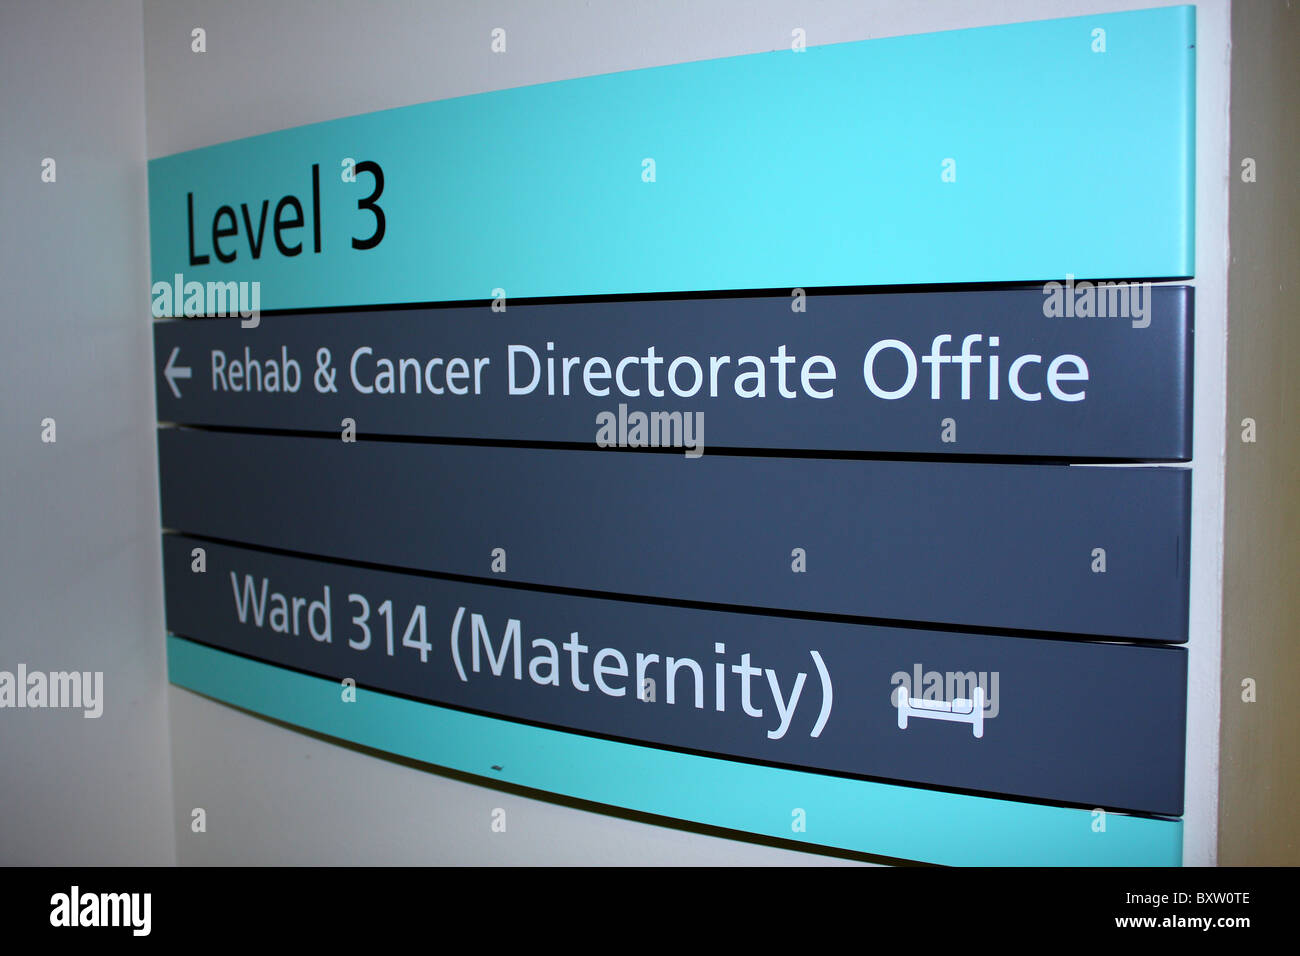 The sign for Level 3 Rehab and Cancer Directorate Office as well as the Maternity ward 314 at Derby Royal Hospital Stock Photo